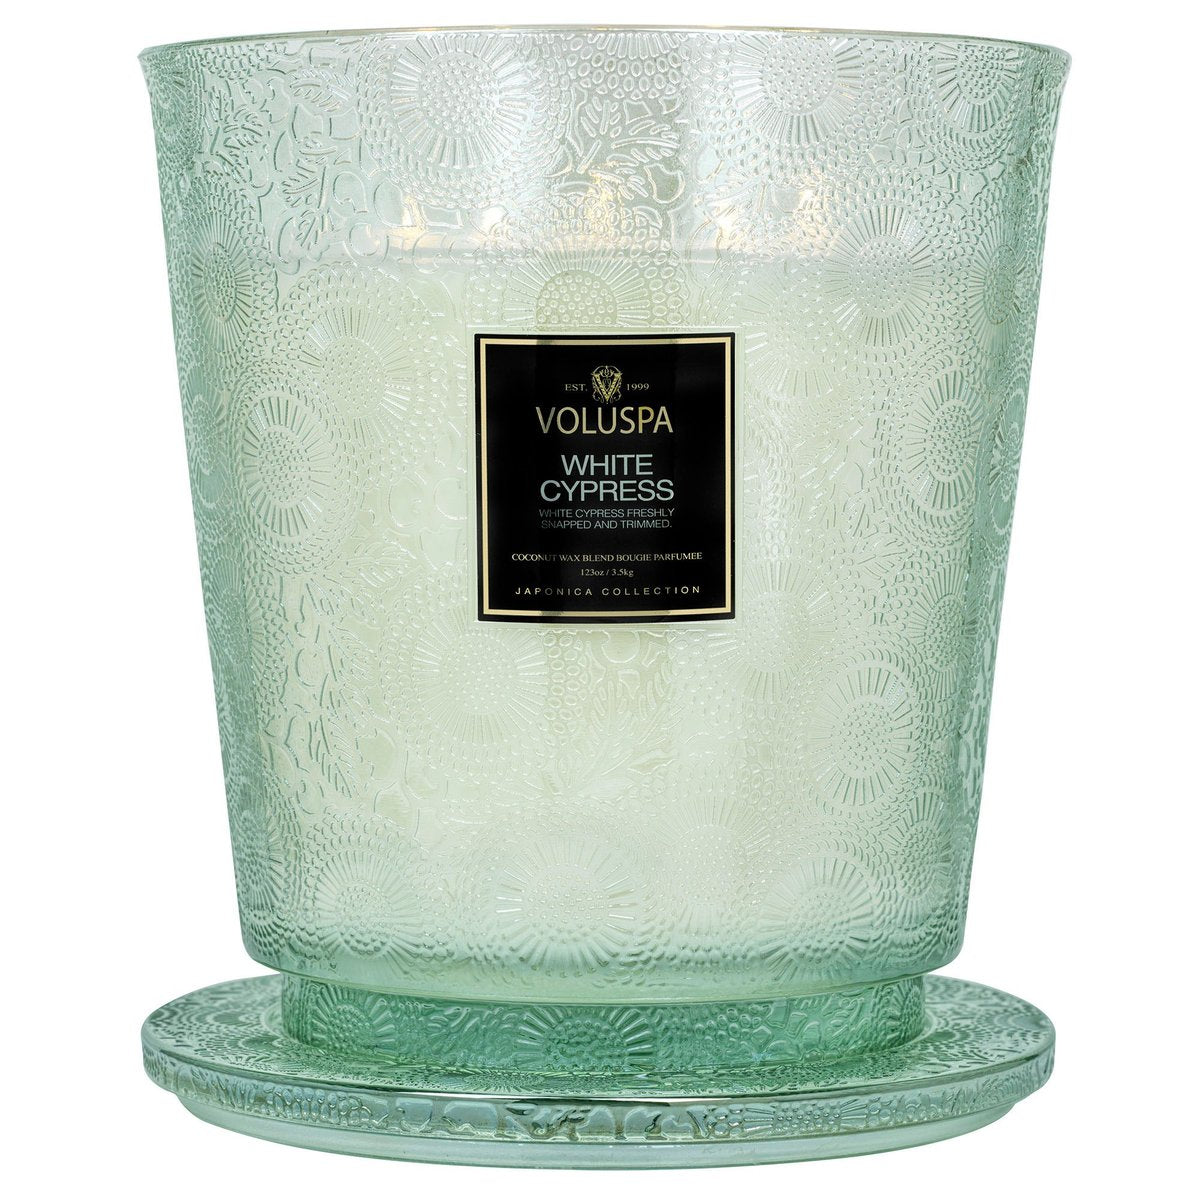 White Cypress 5-Wick Hearth Candle